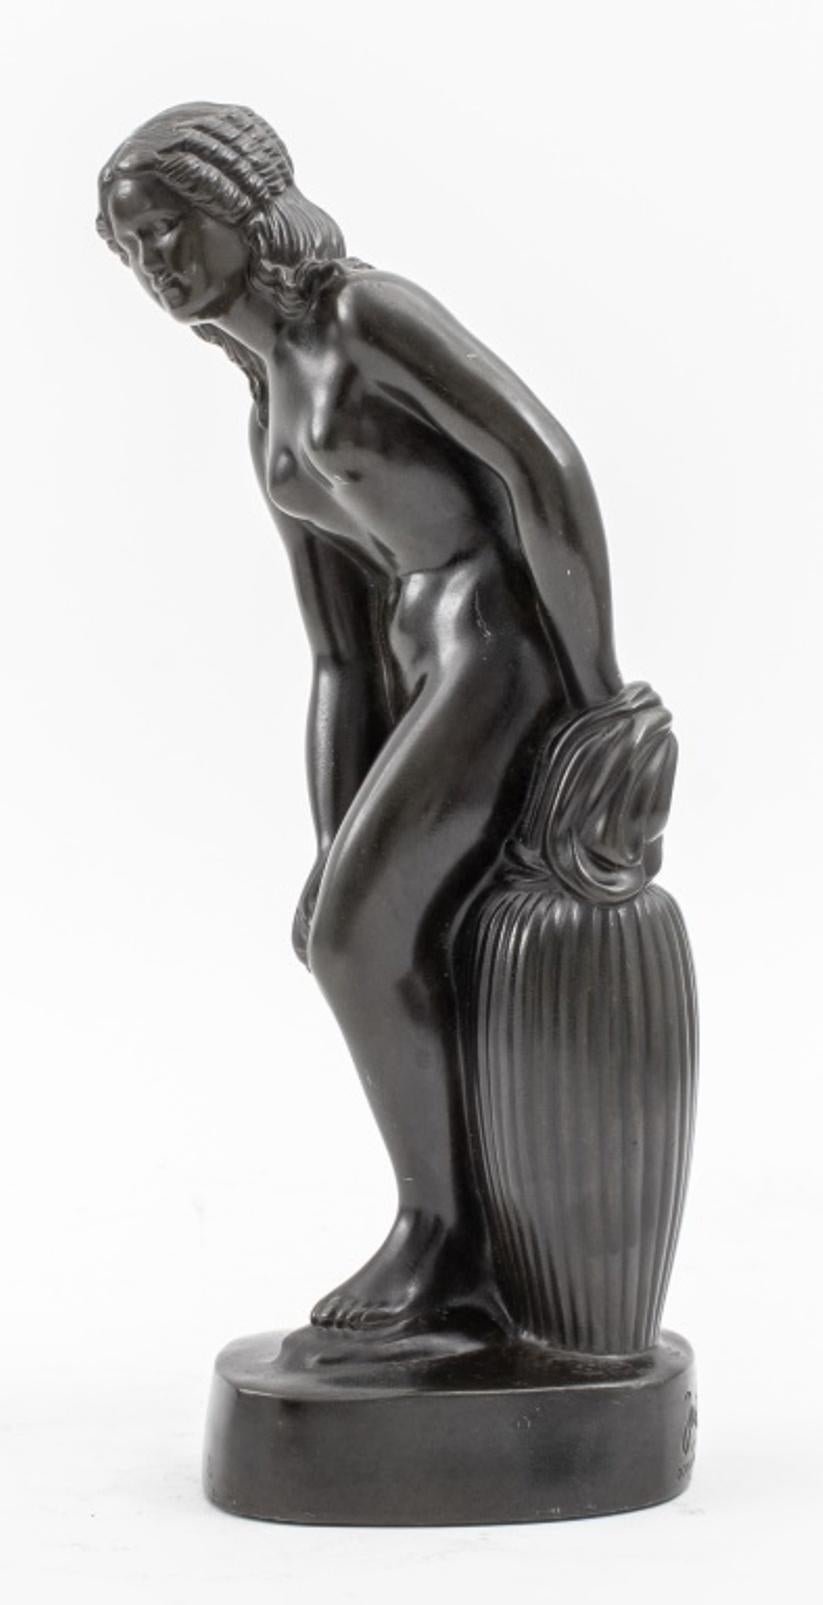 Just Andersen (Danish, 1884-1943) Art Deco statue sculpture depicting a standing nude female figure, signed and marked 